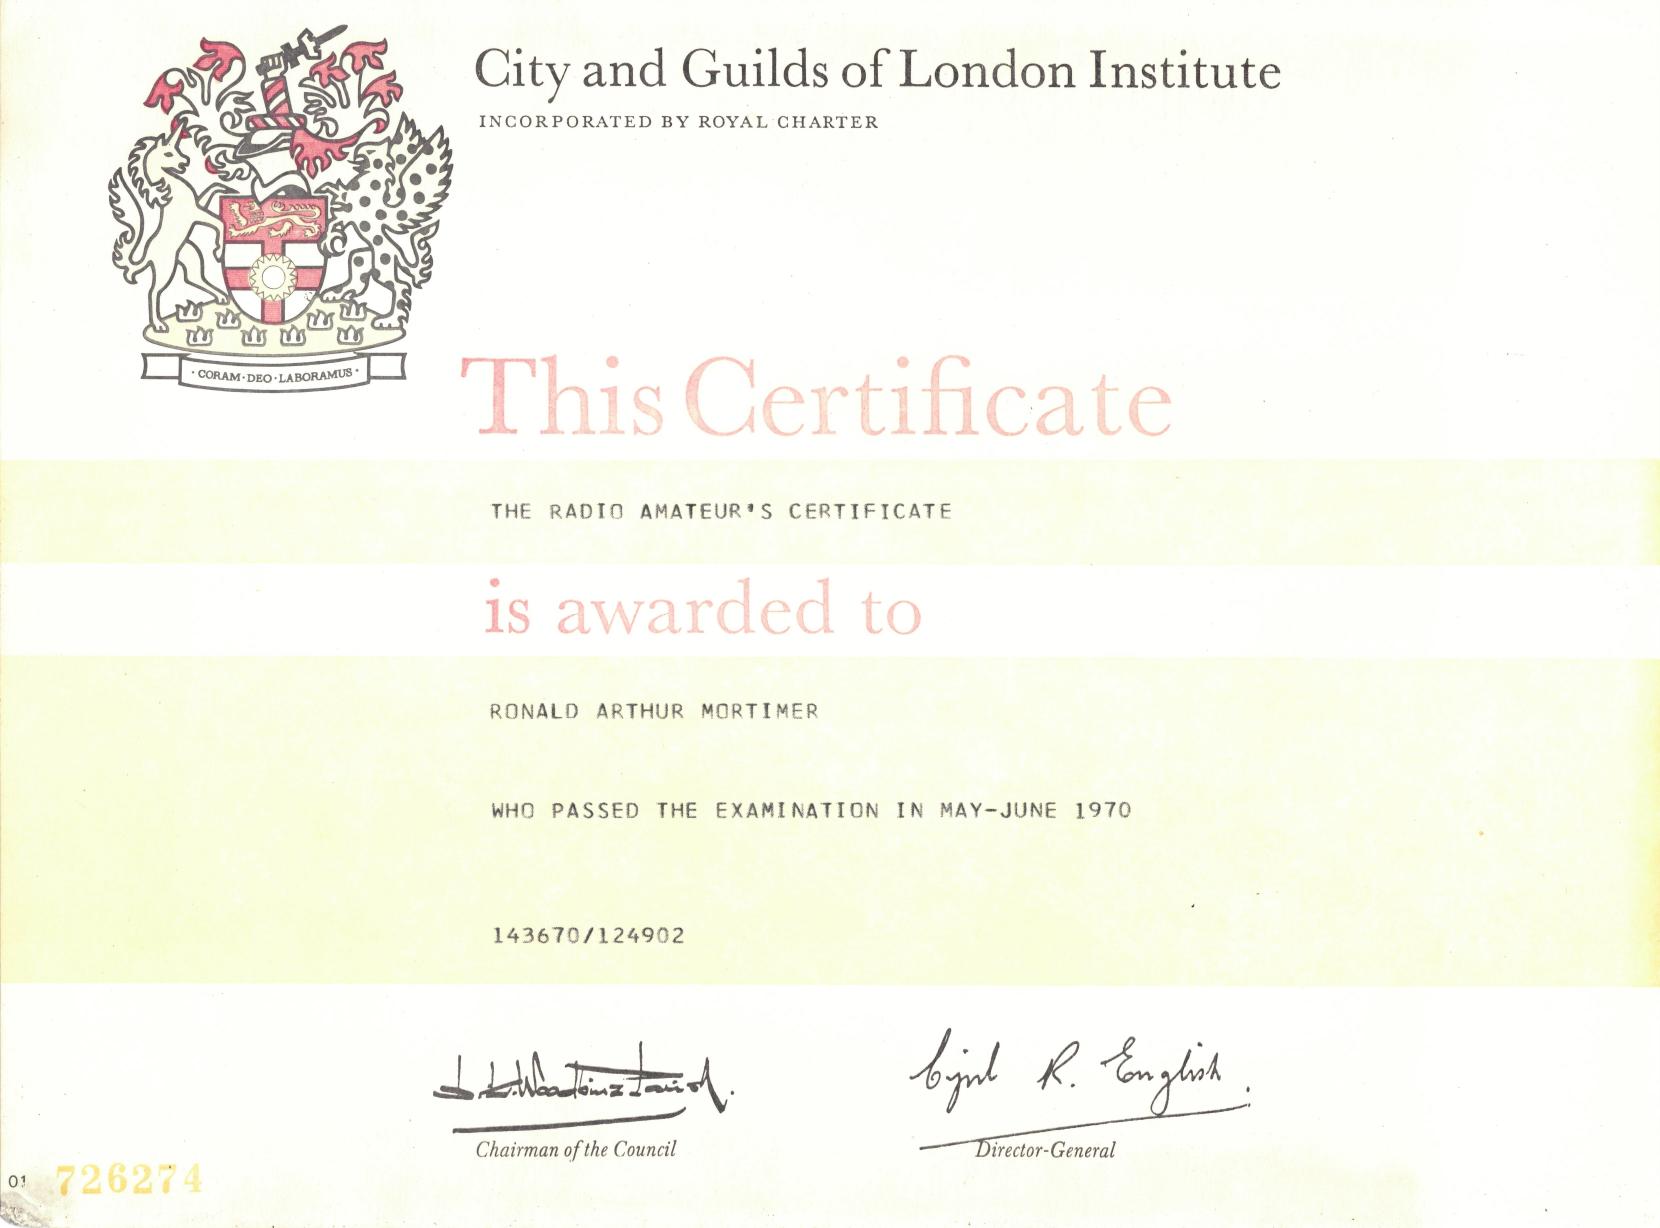 City and Guilds Certificate - 1970